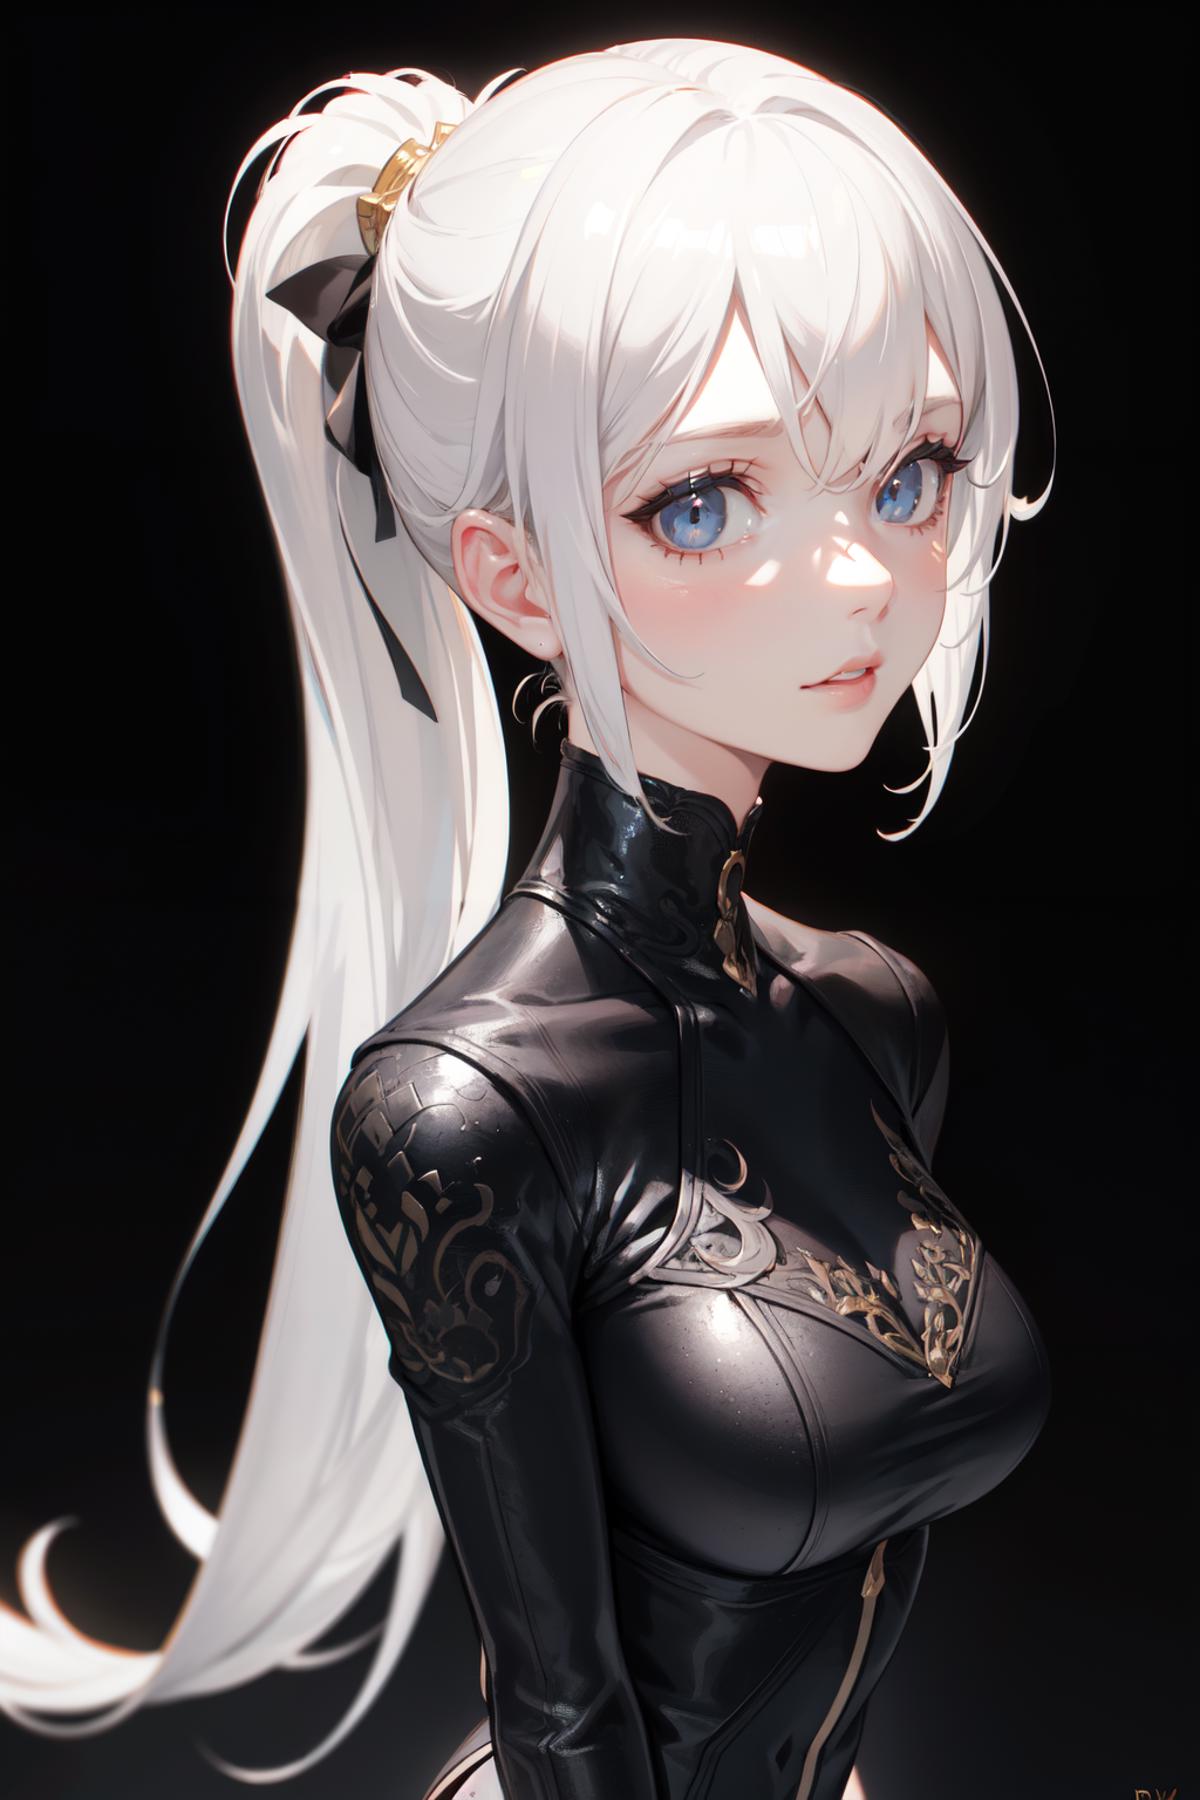 A beautiful and elegant female character with blue eyes and white hair, wearing a black leather outfit and a black bow in her hair.